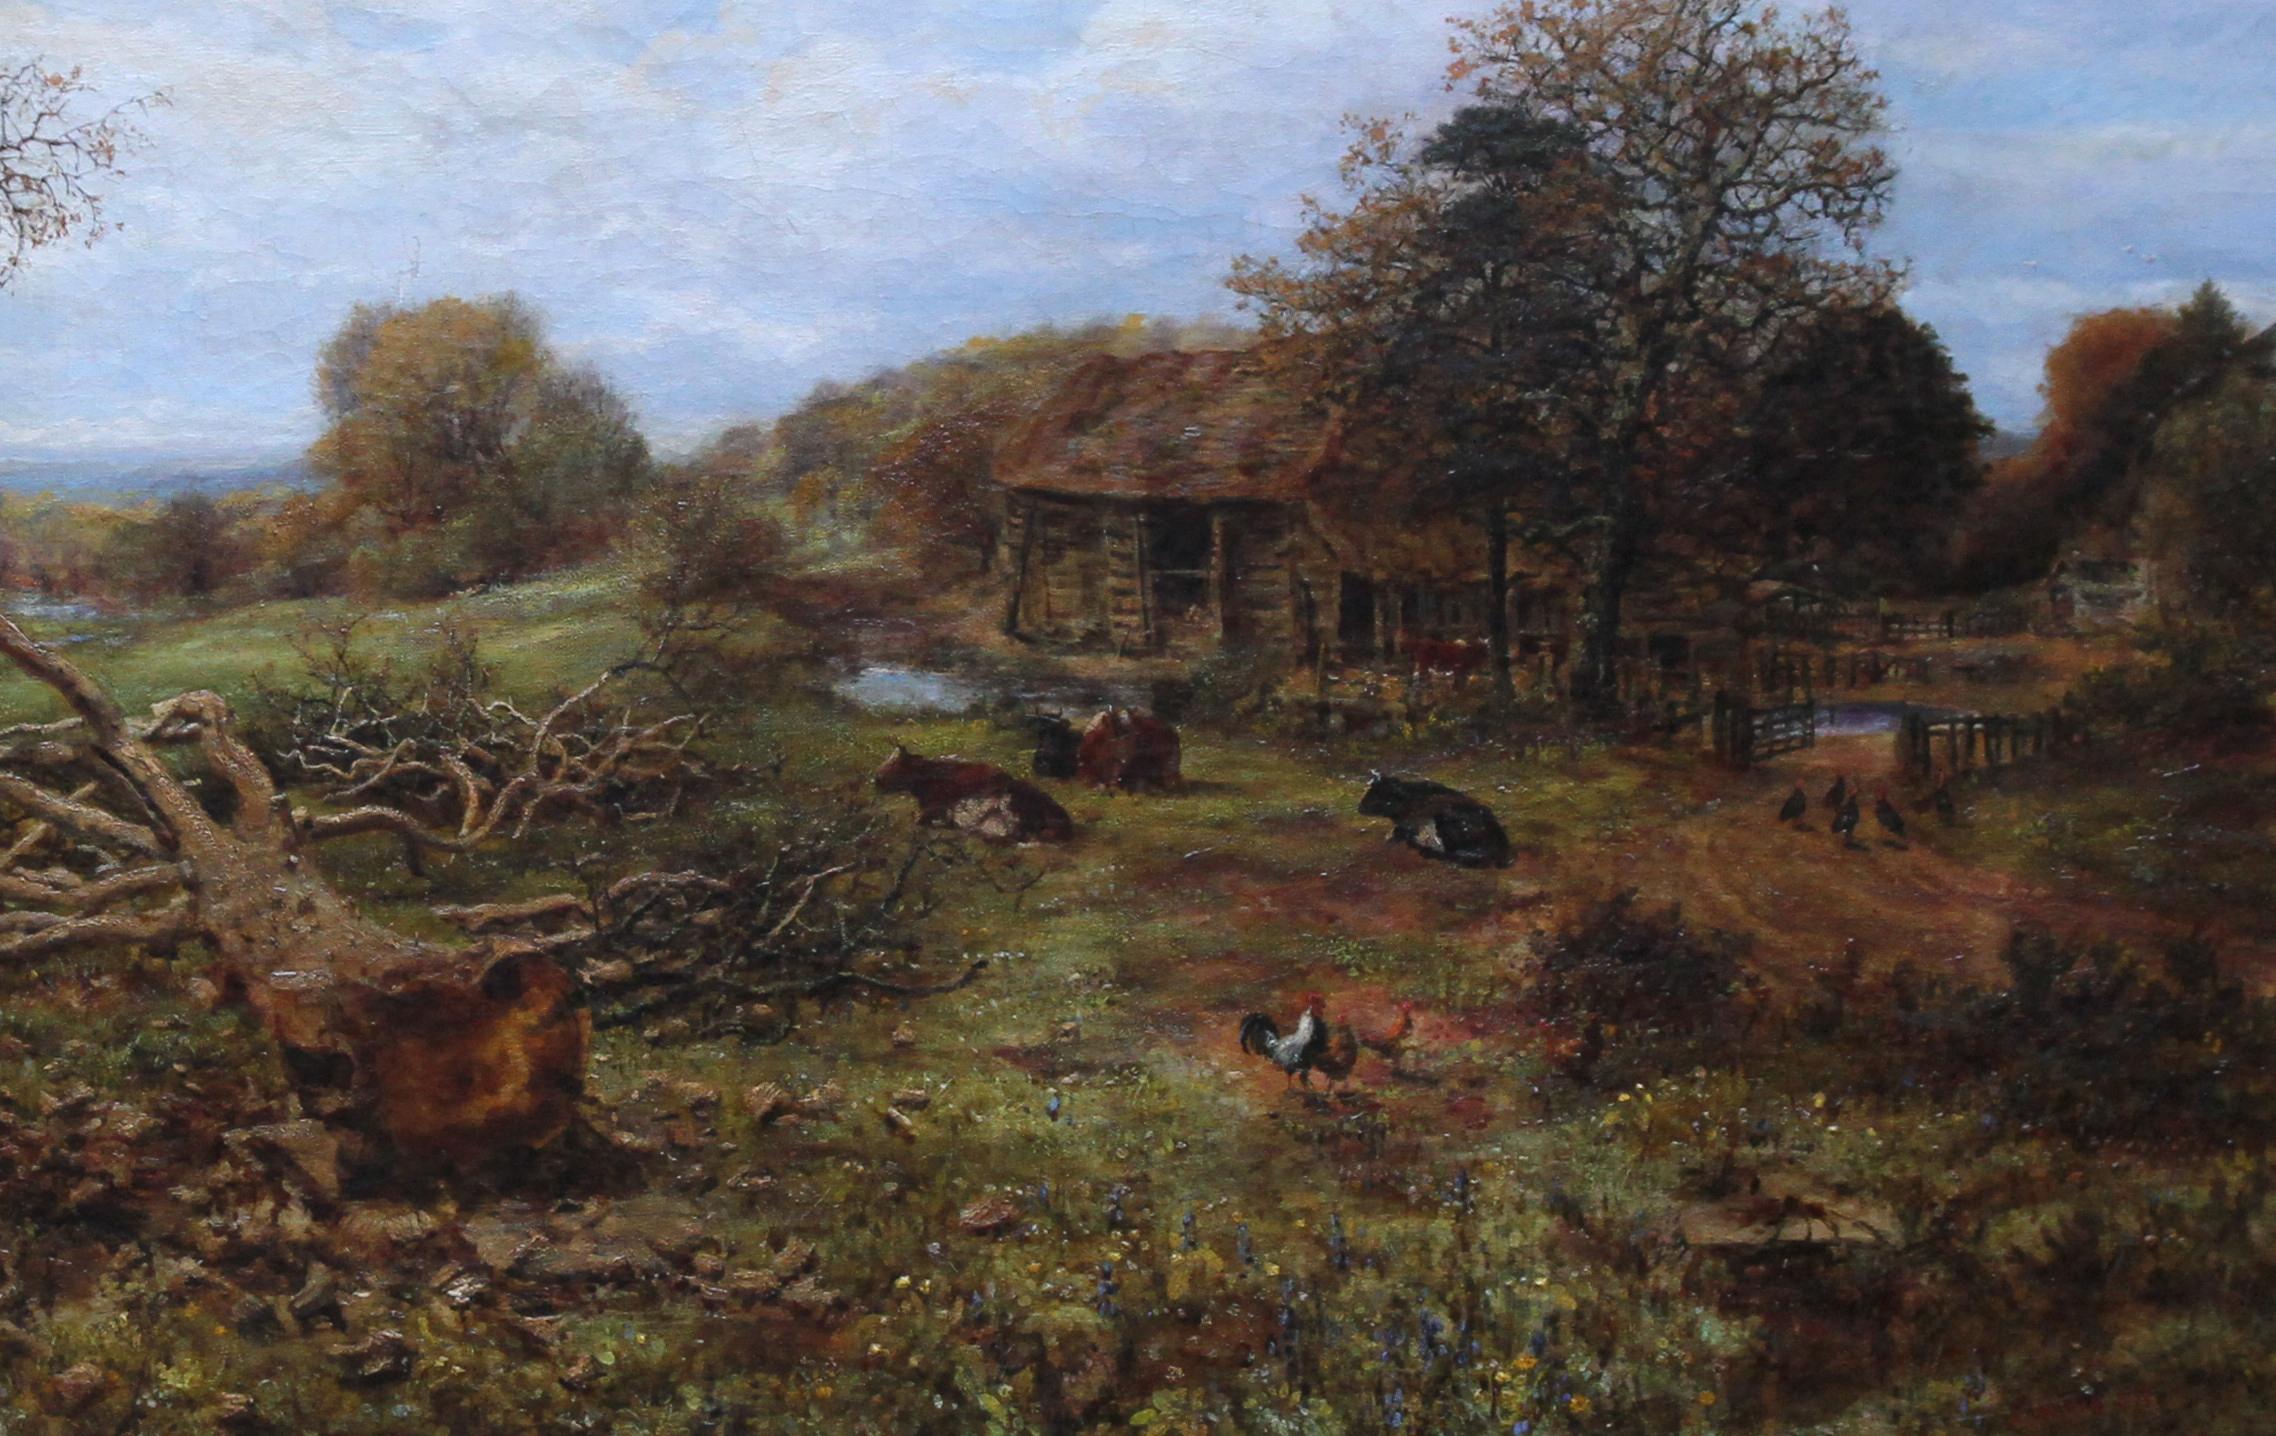 This charming Victorian landscape oil painting is by noted prolific exhibited British artist George William Mote. Mote was very fond of painting landscapes in Surrey and this is a particularly fine example of his work with cattle and chickens in a